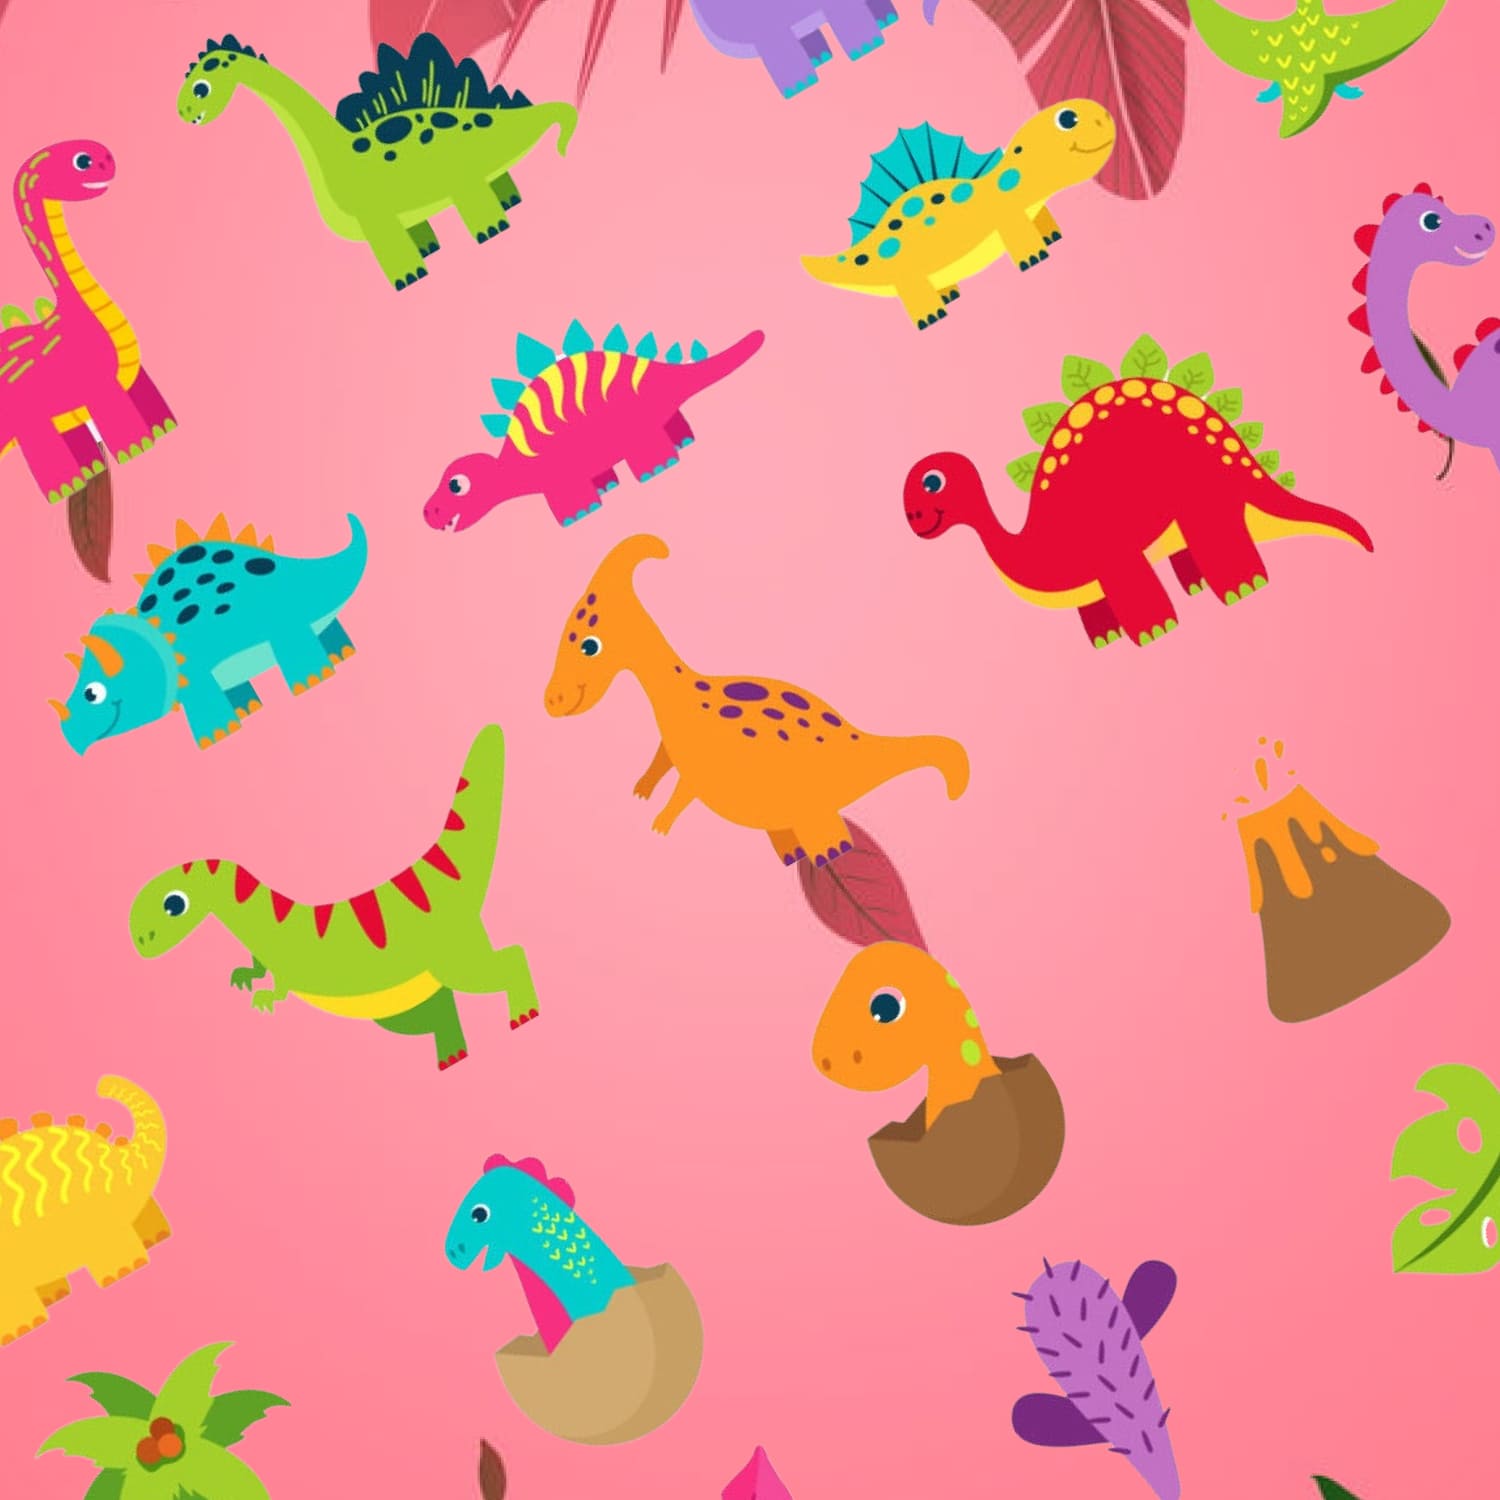 Group of colorful dinosaurs on a pink background.